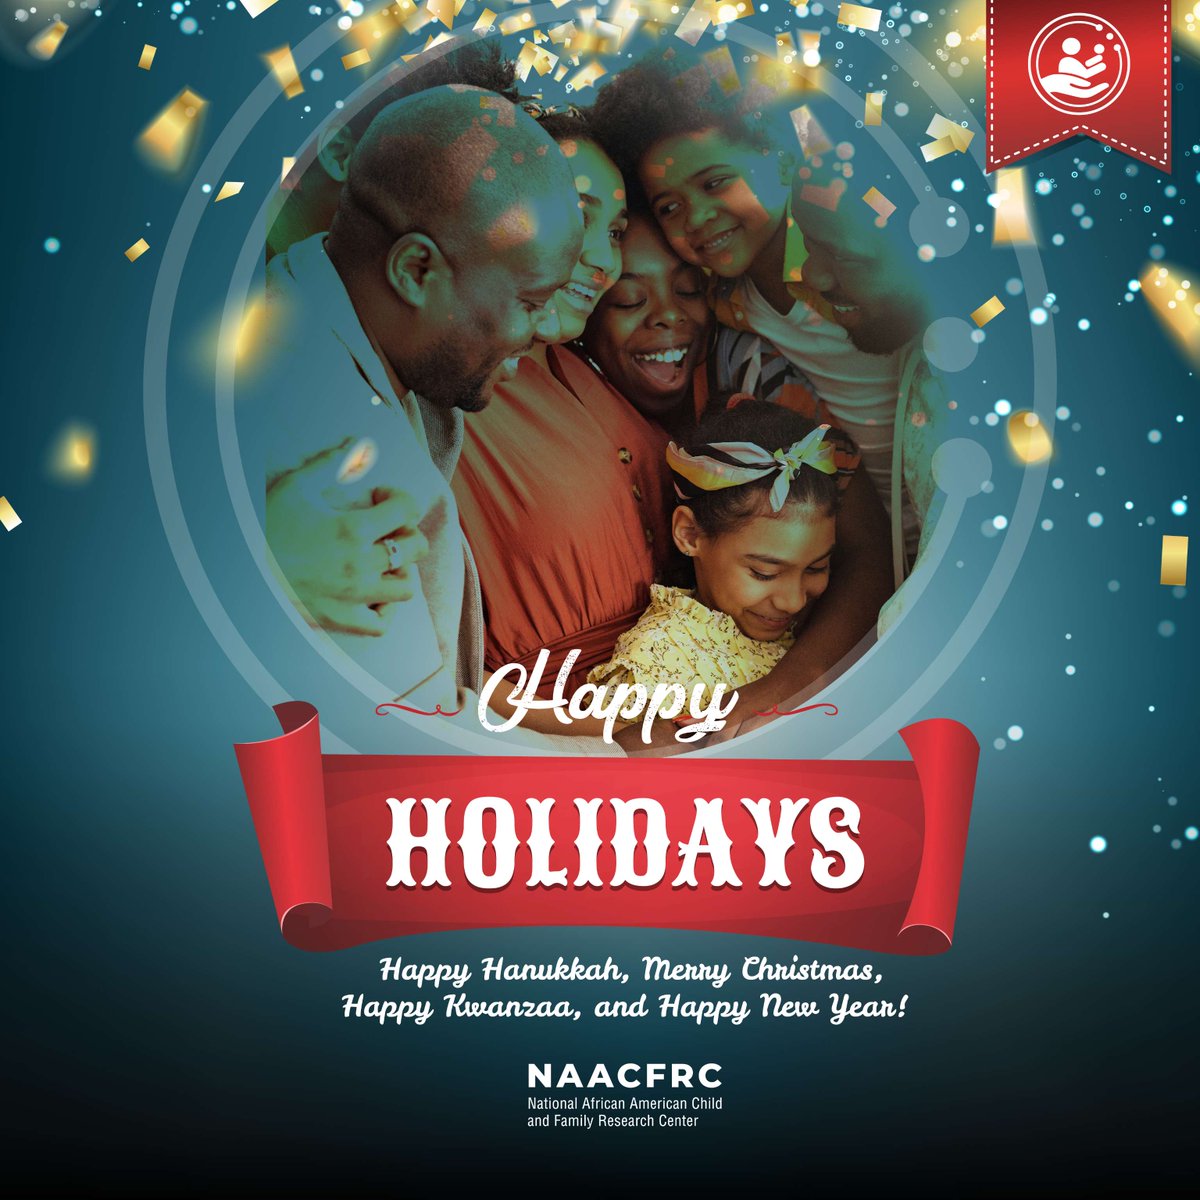 The National African American Child & Family Research Center Celebrates this Season of Joy, Compassion and Peace with You! 
Happy Holidays! 
 #BlackFamily  #BlackResearchers  #racialequity  #progress  #NAACFRC